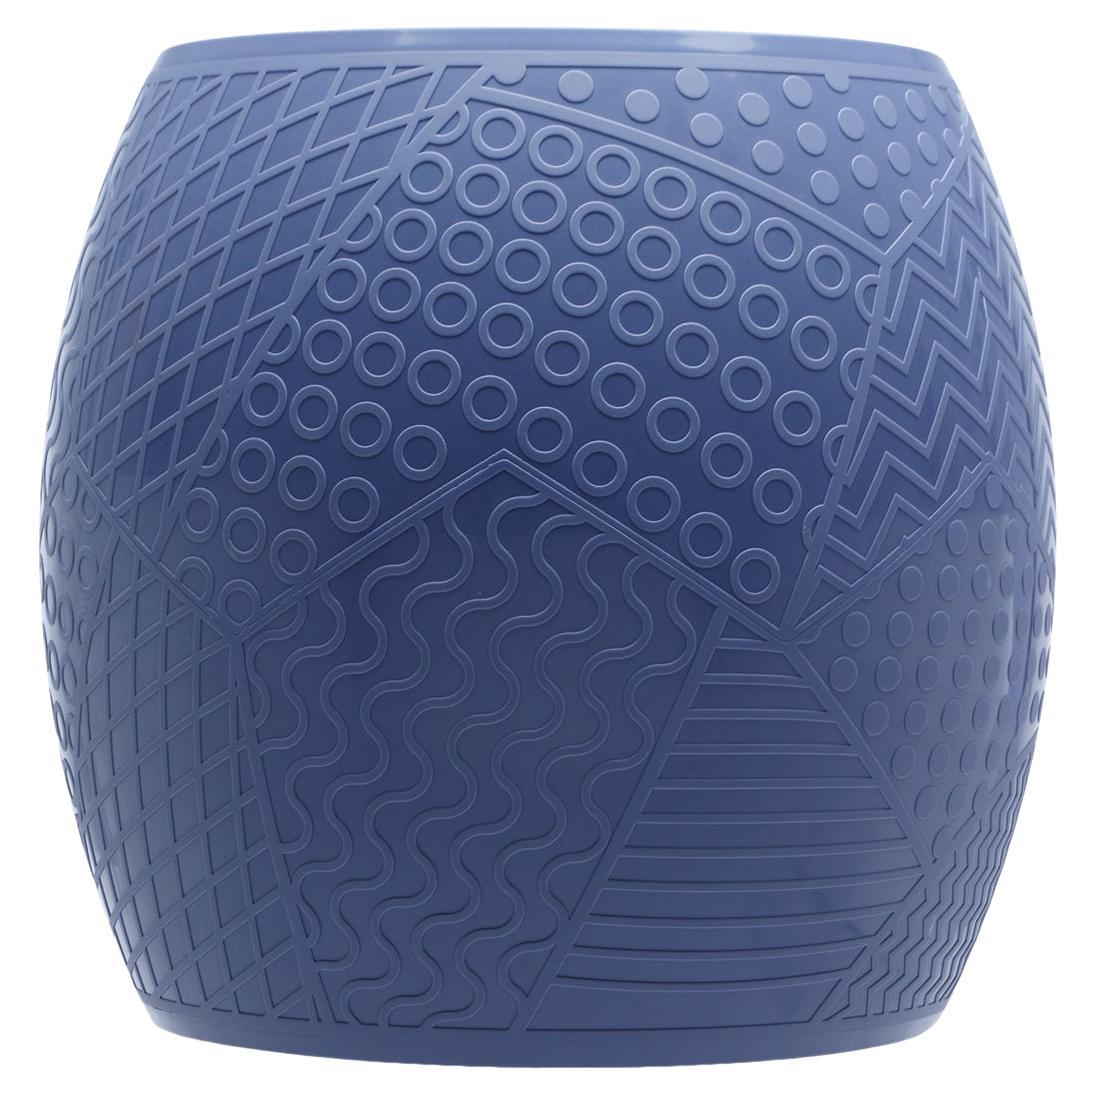 Kartell Roy Stool in Blue by Alessandro Mendini For Sale